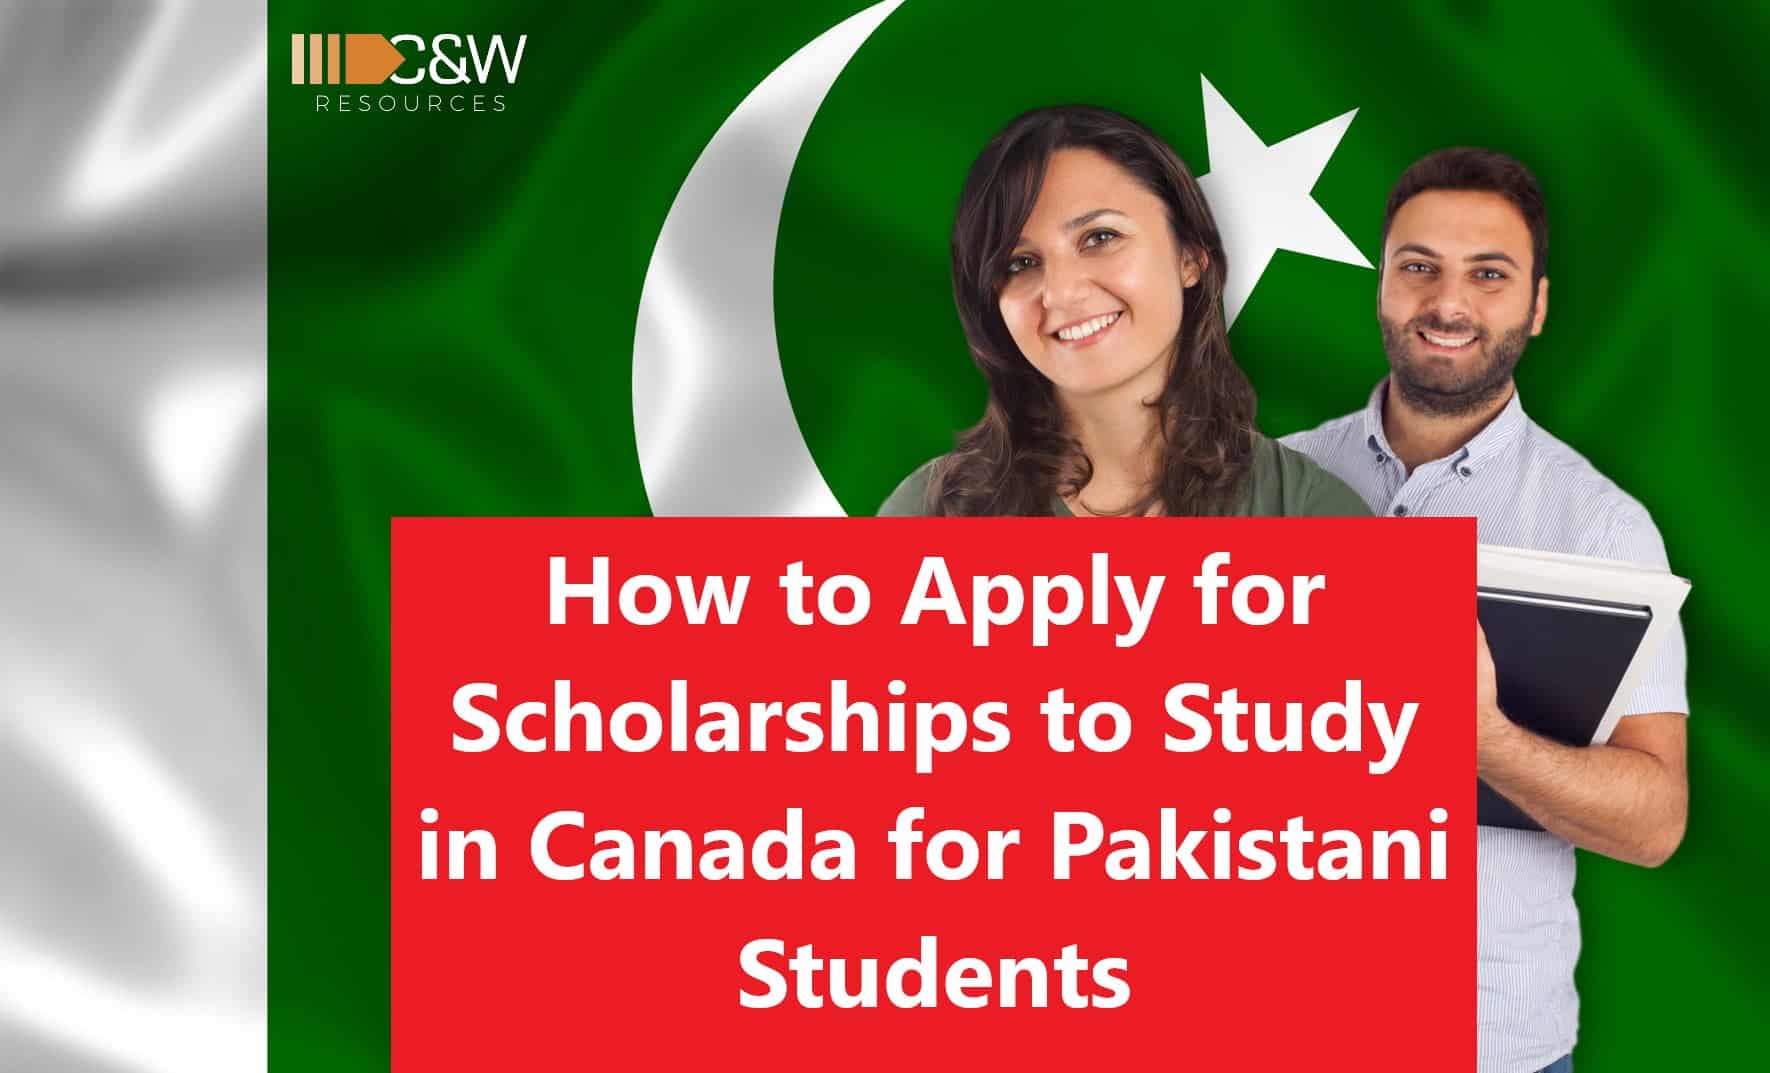 How To Apply For Scholarships to Study in Canada For Pakistani Students 2023 - C&W Resources